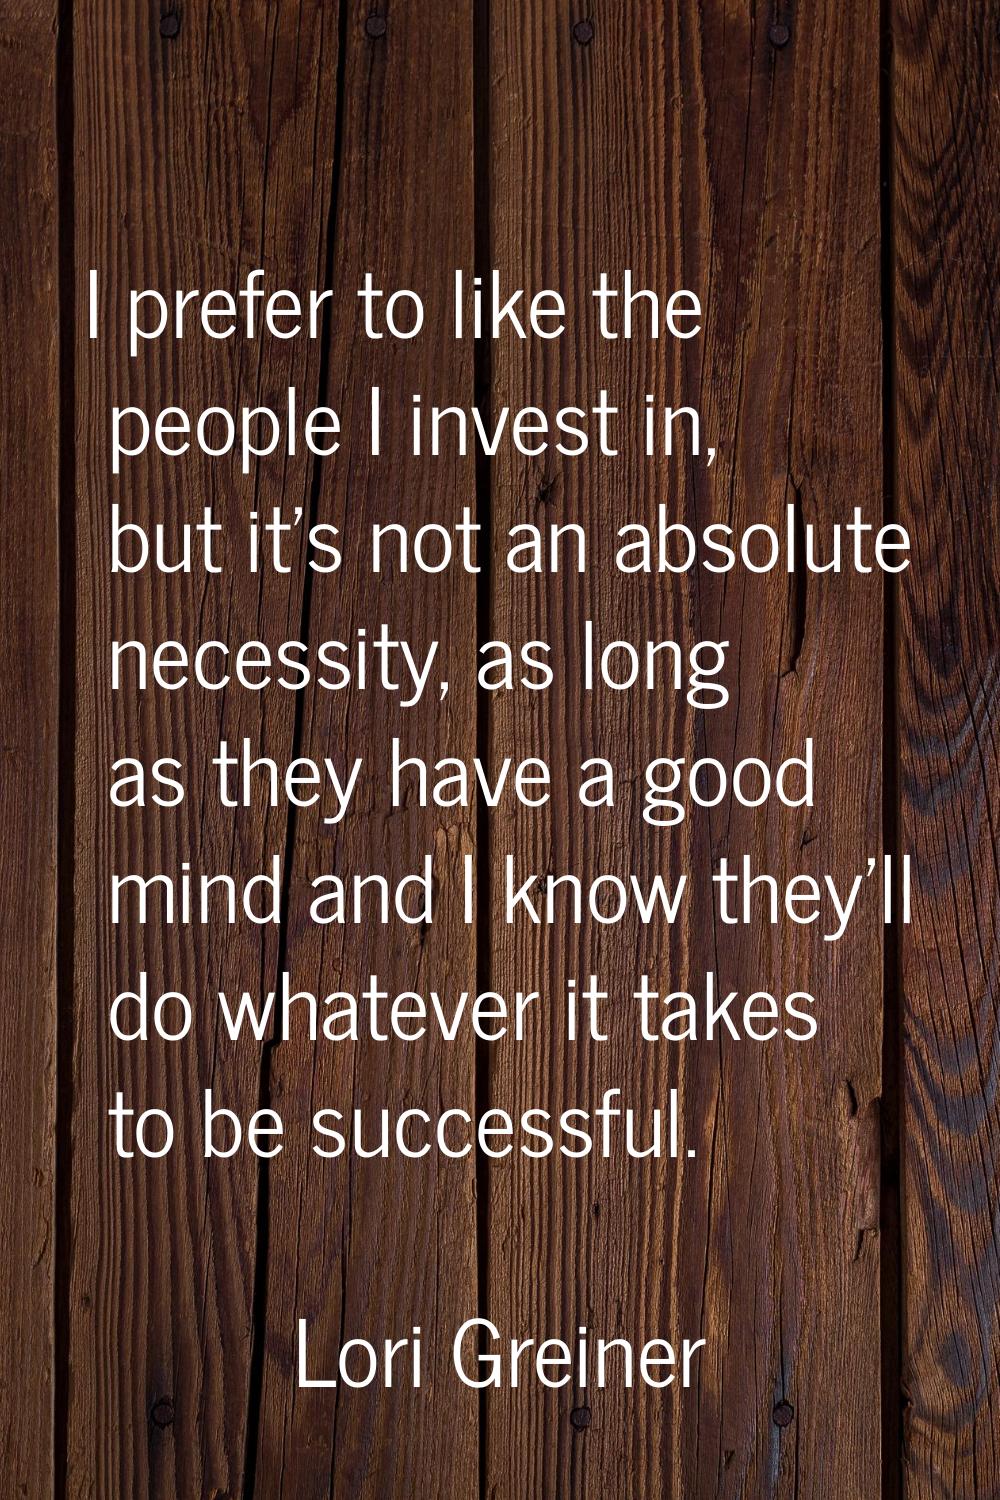 I prefer to like the people I invest in, but it's not an absolute necessity, as long as they have a